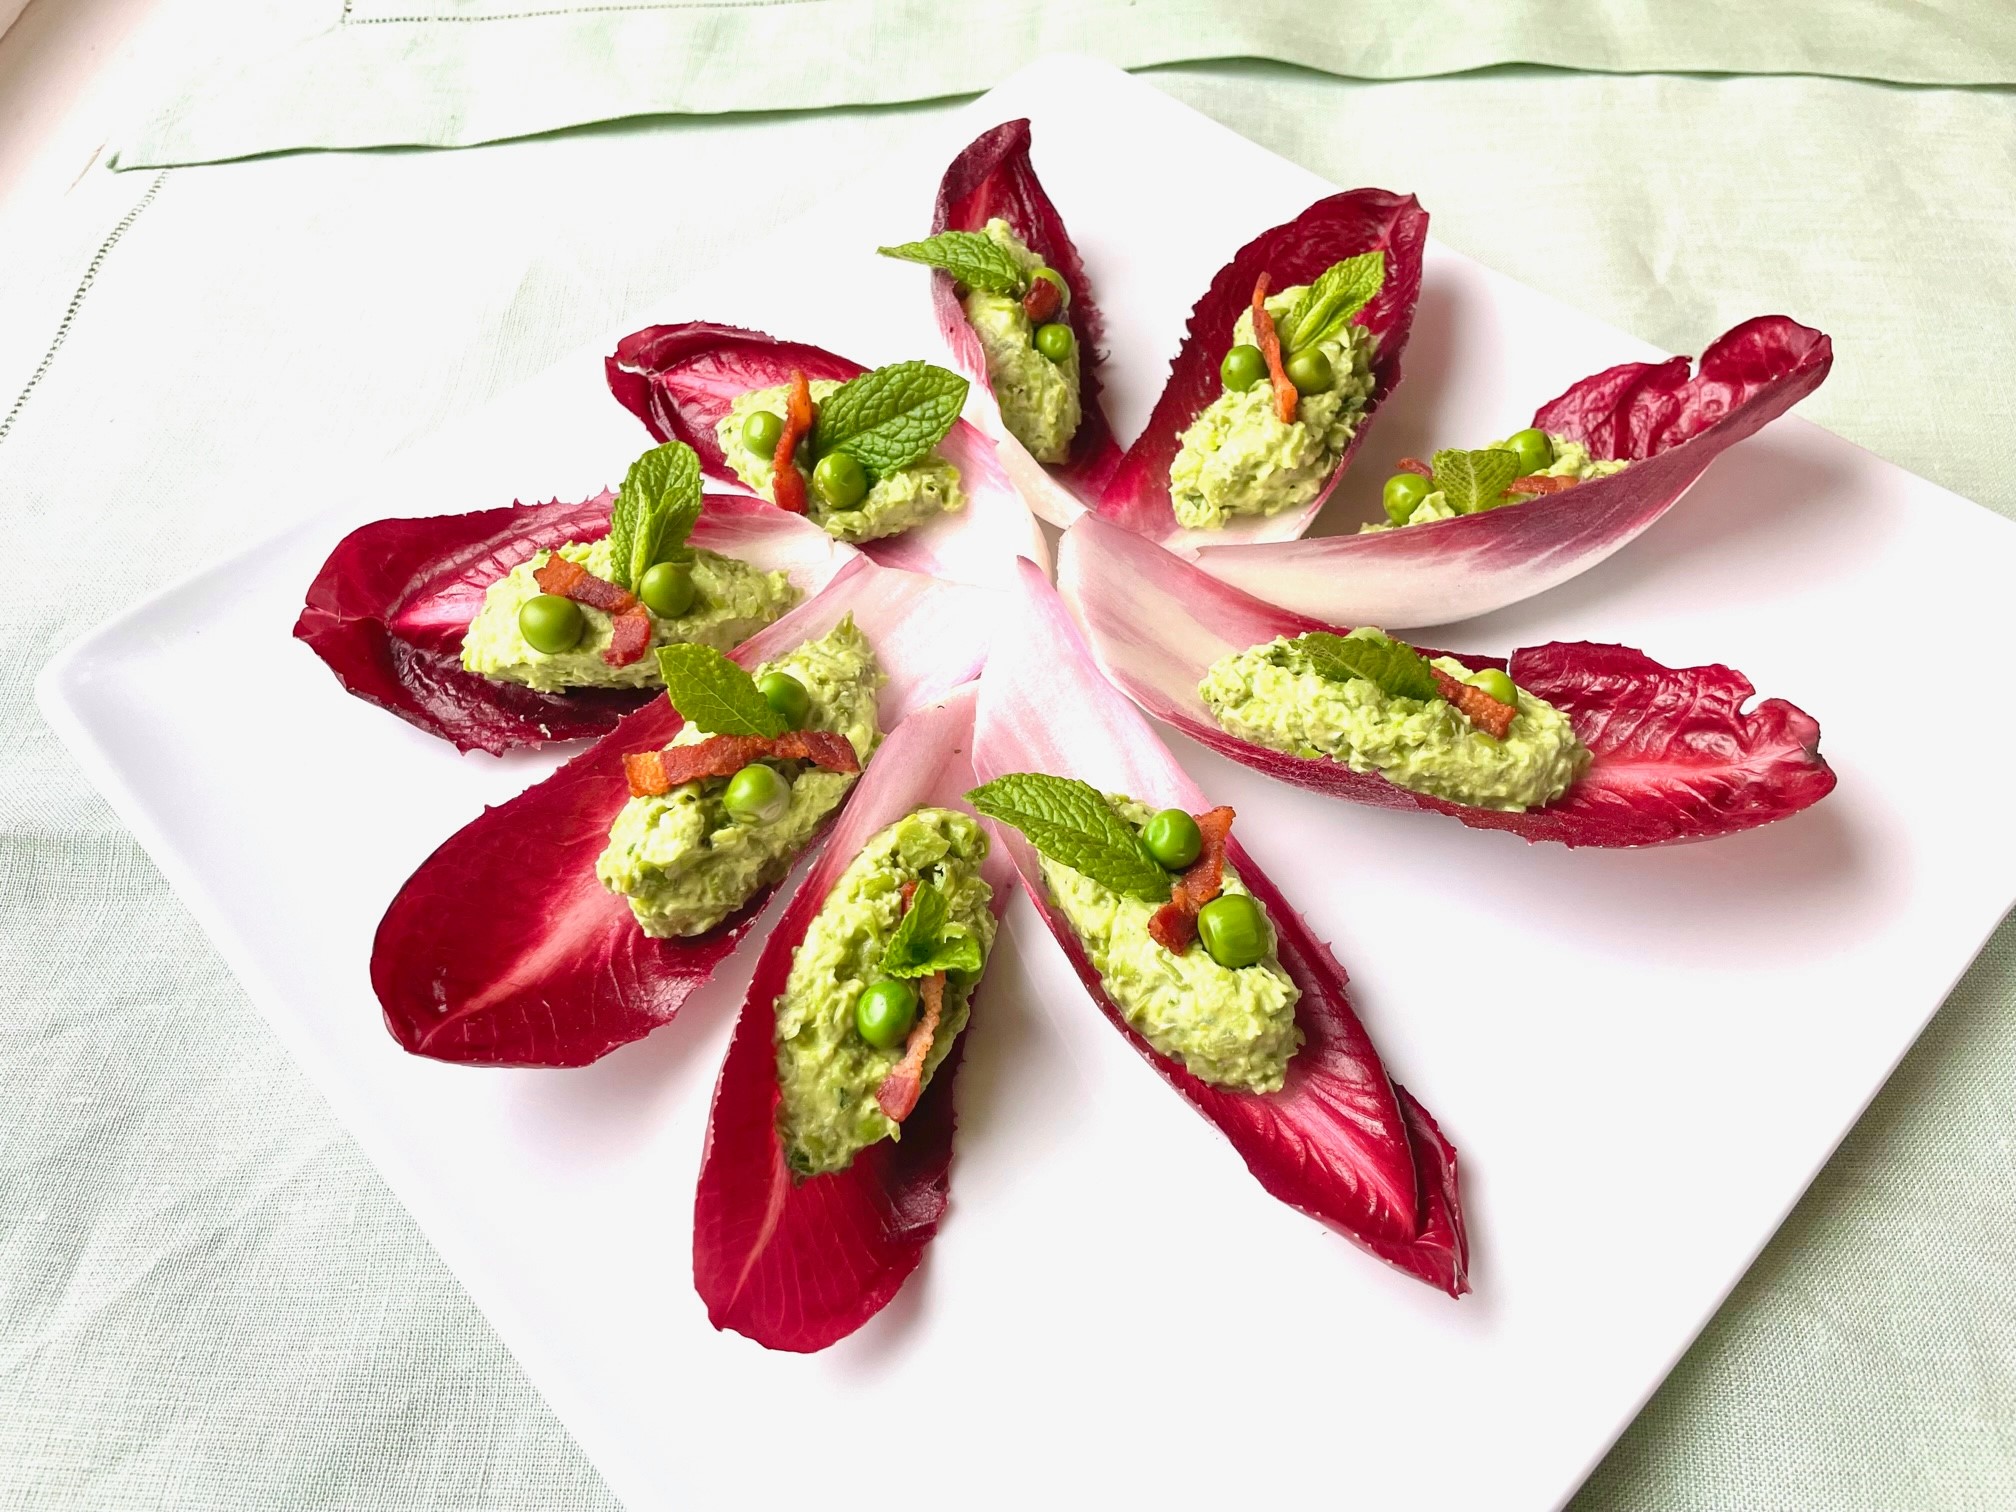 Don't Hire a Caterer: Spring Hors d’Oeuvre